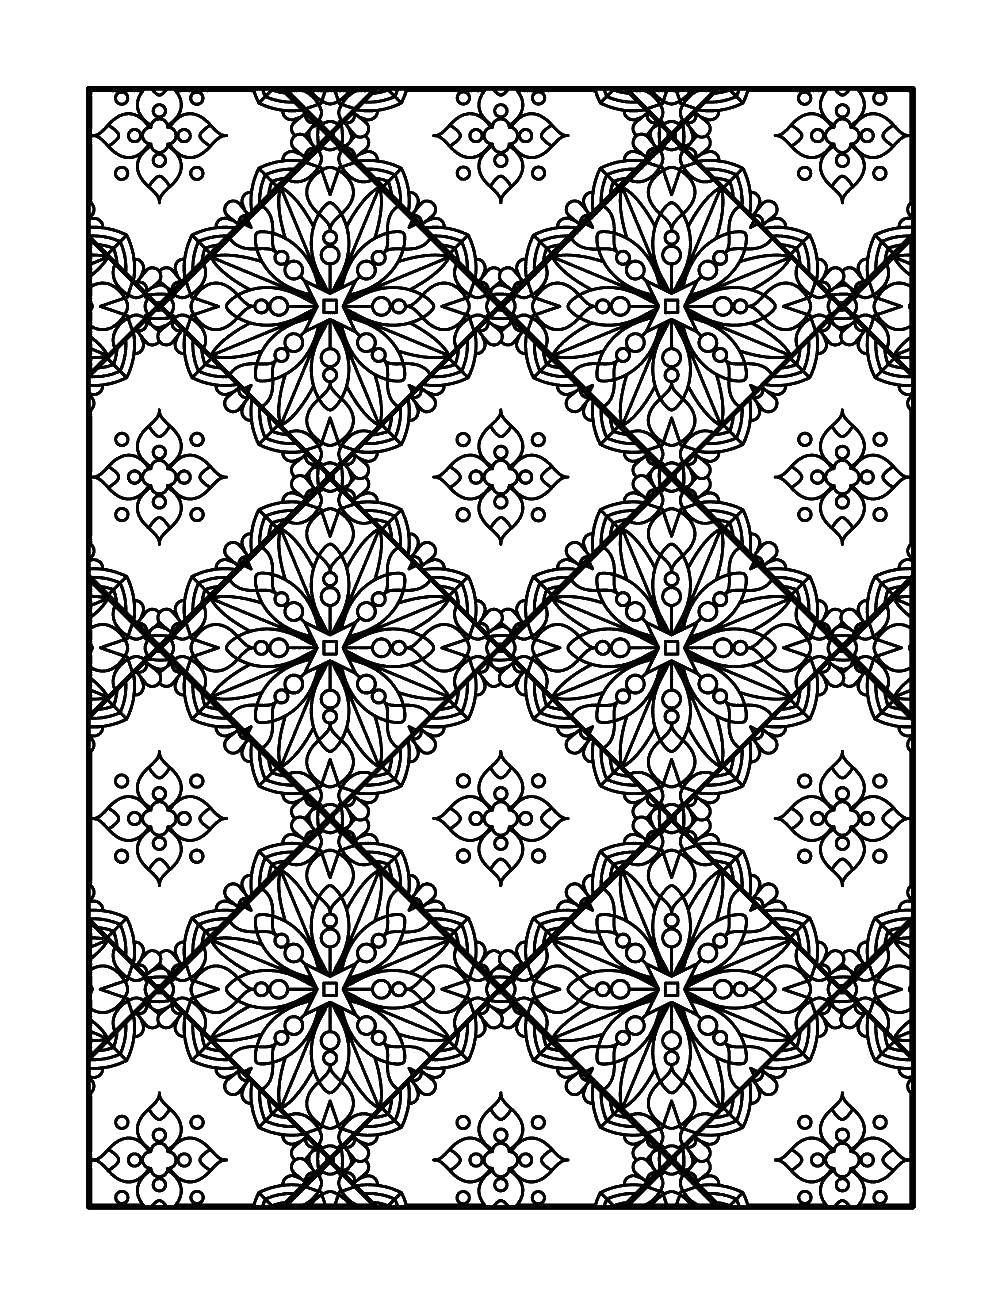 Coloring Patterned canvas. Category patterns. Tags:  Patterns, flower.